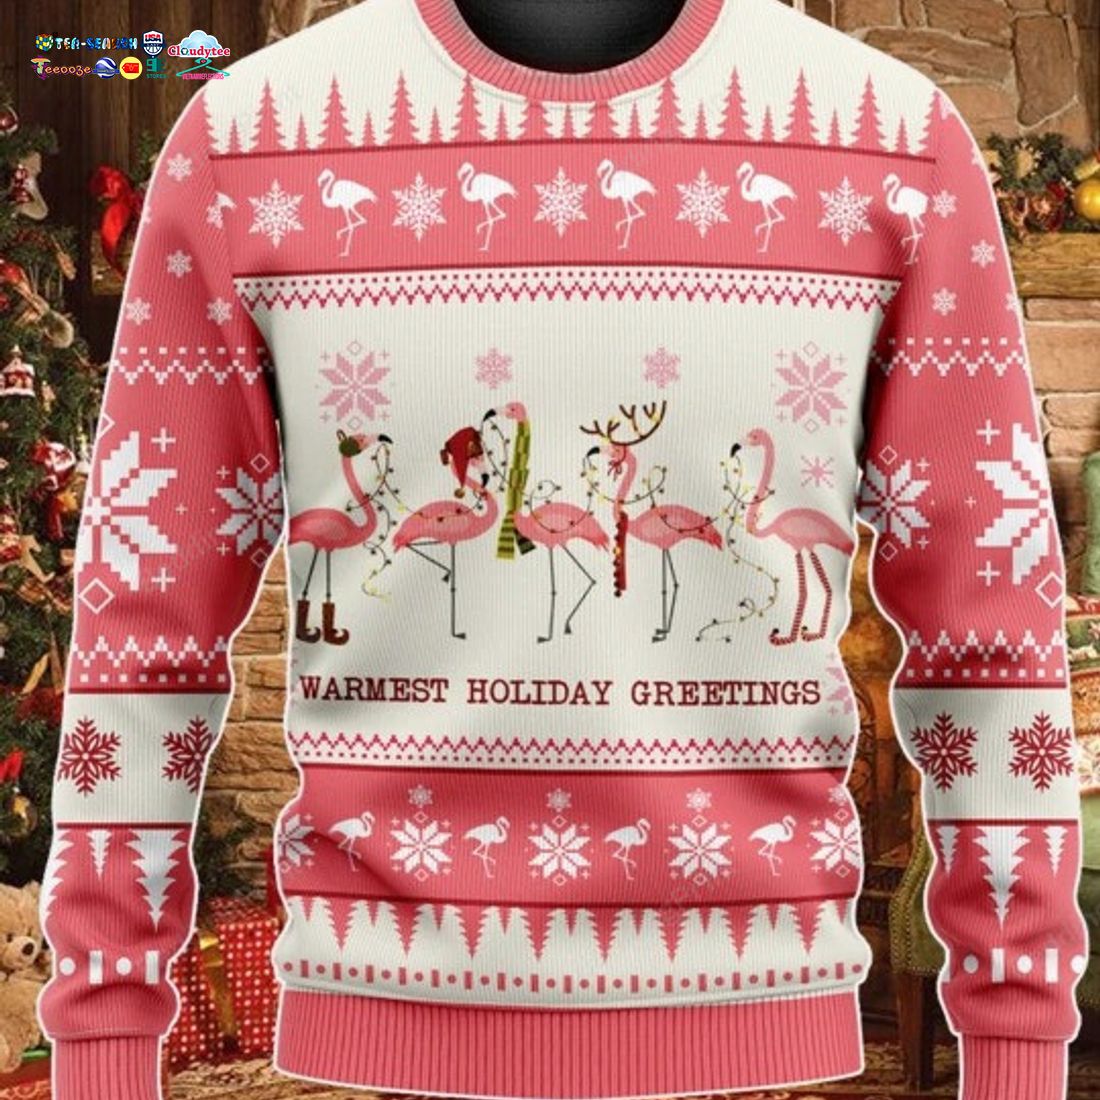 Flamingo Warmest Holiday Greetings Ugly Christmas Sweater - Elegant picture.